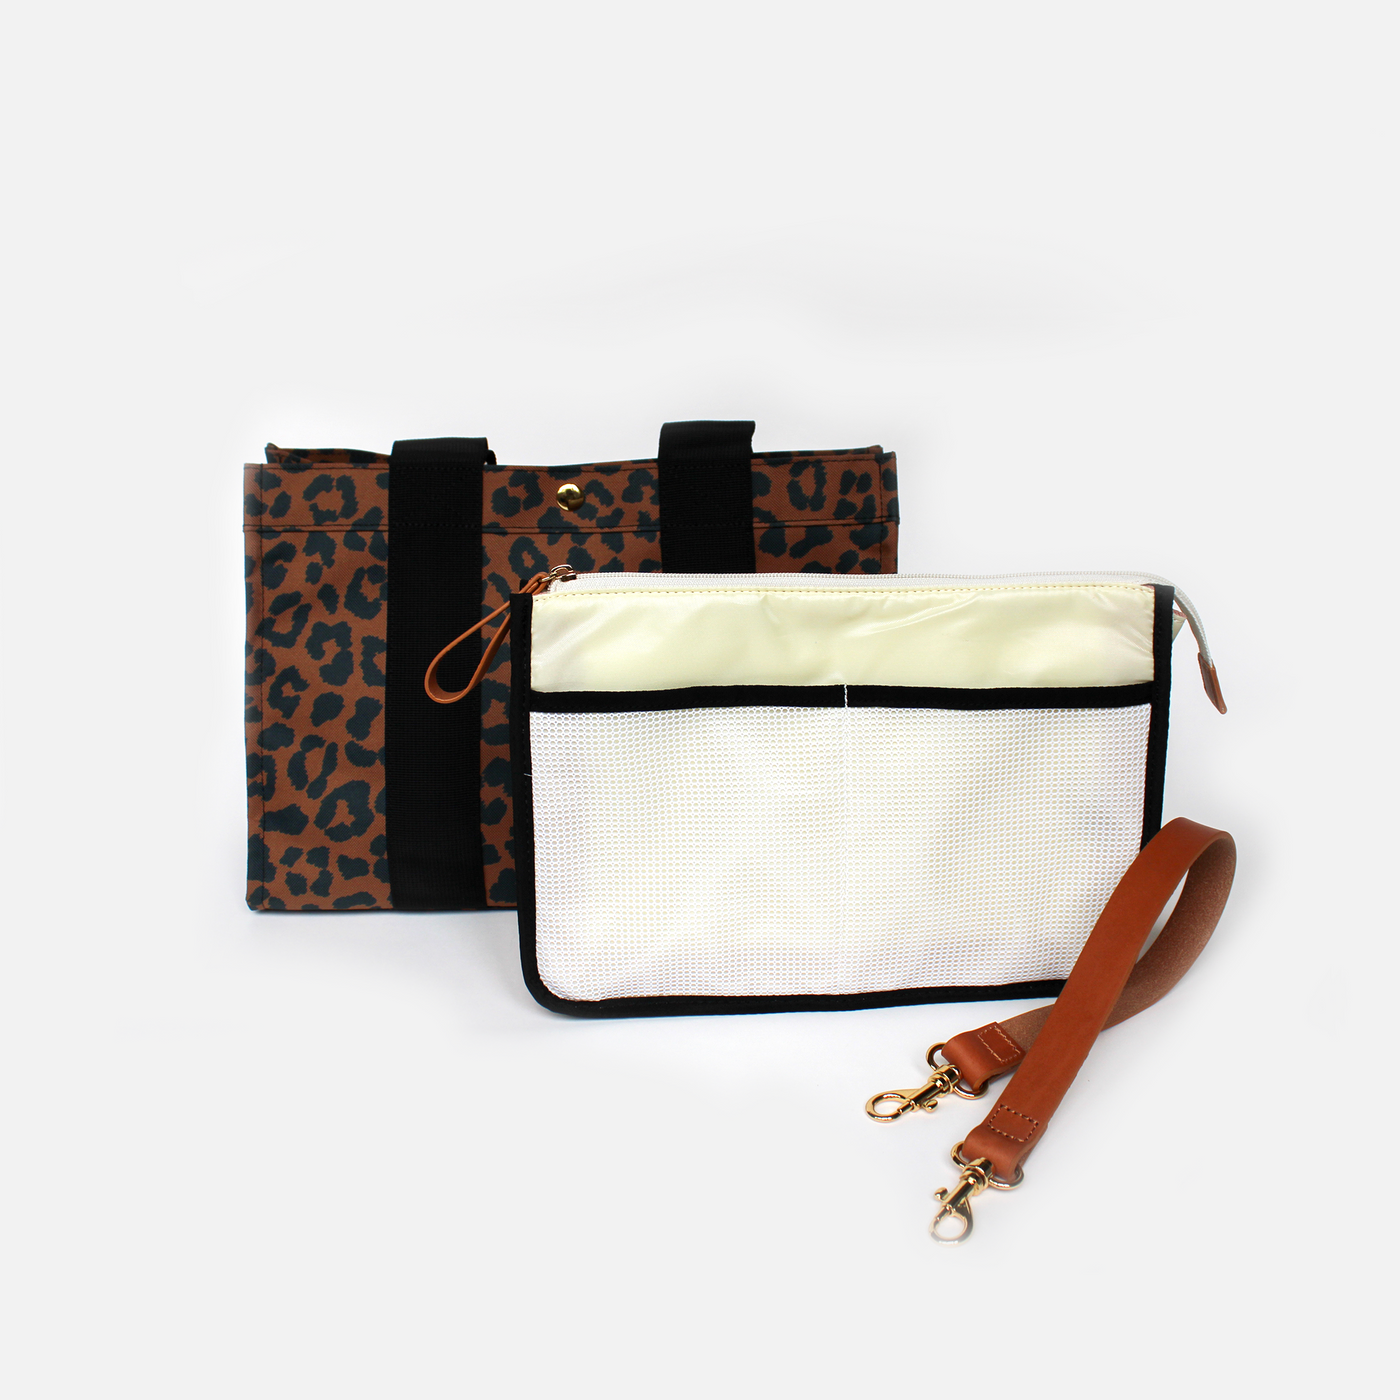 Kylie Leopard Tote